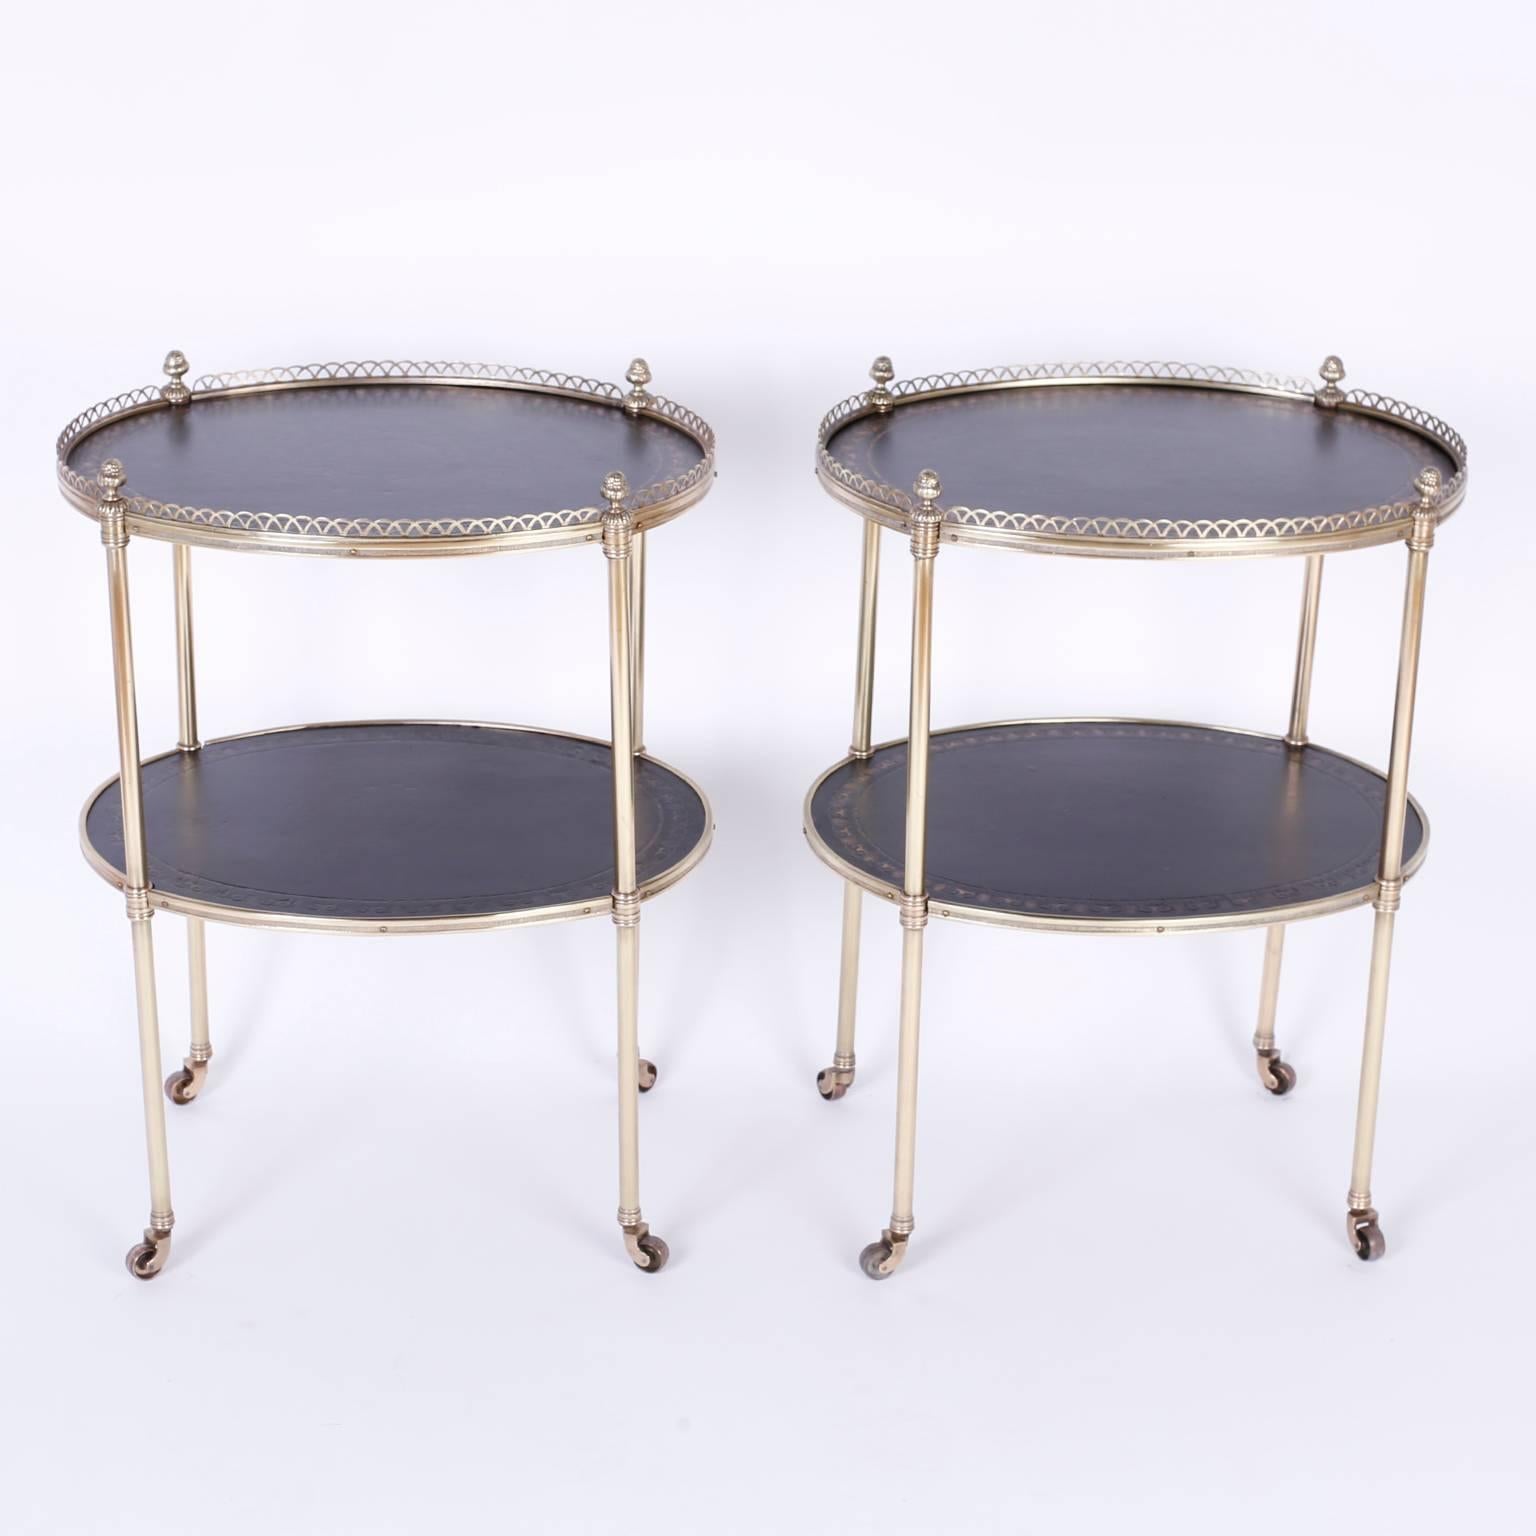 Regency Chic Pair of Midcentury Brass Serving Carts or End Tables